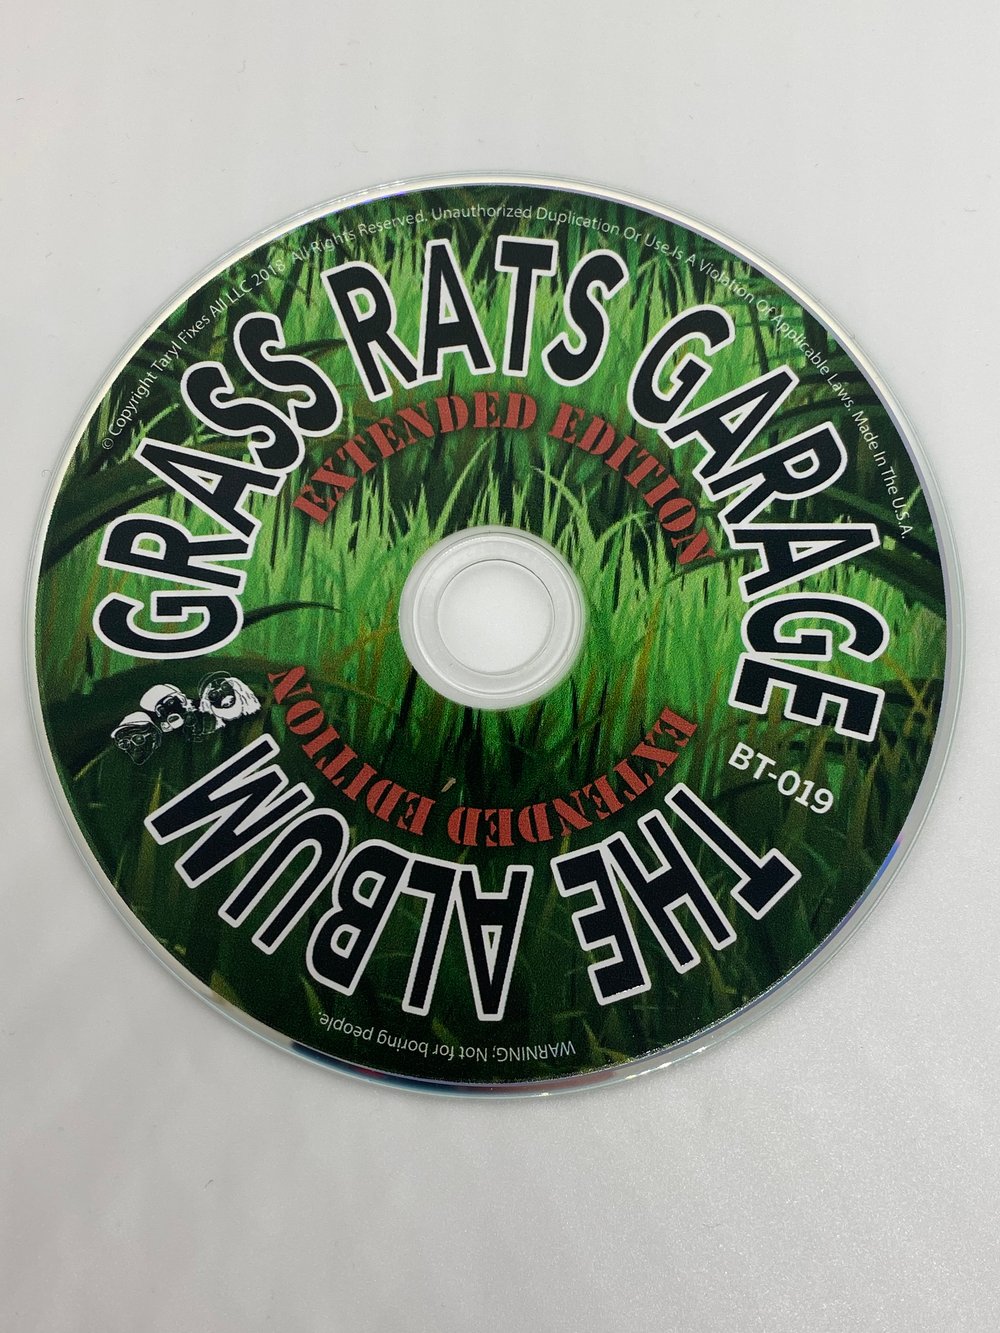 Theme Music on CD! Grass Rats Garage The Album EXTENDED - 45 Tracks! 